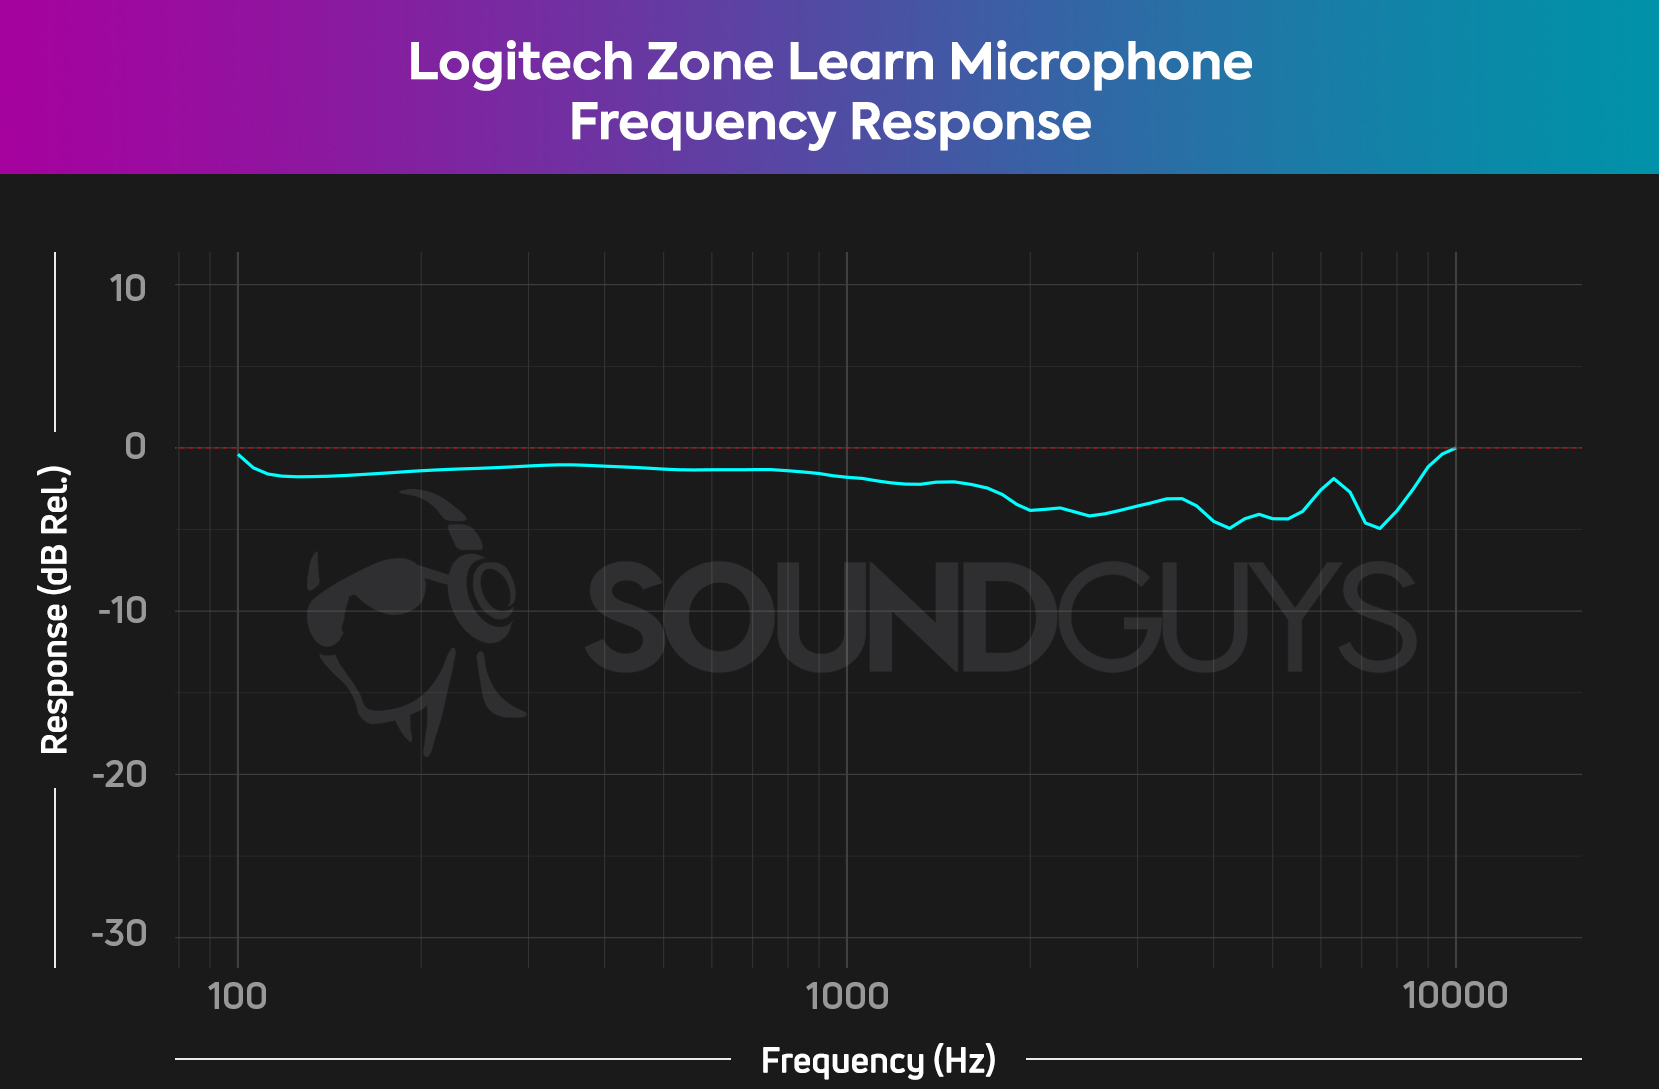 The Logitech Zone Learn microphone frequency response chart, showing a very flat frequency response line with only some small peaks in the high end. 